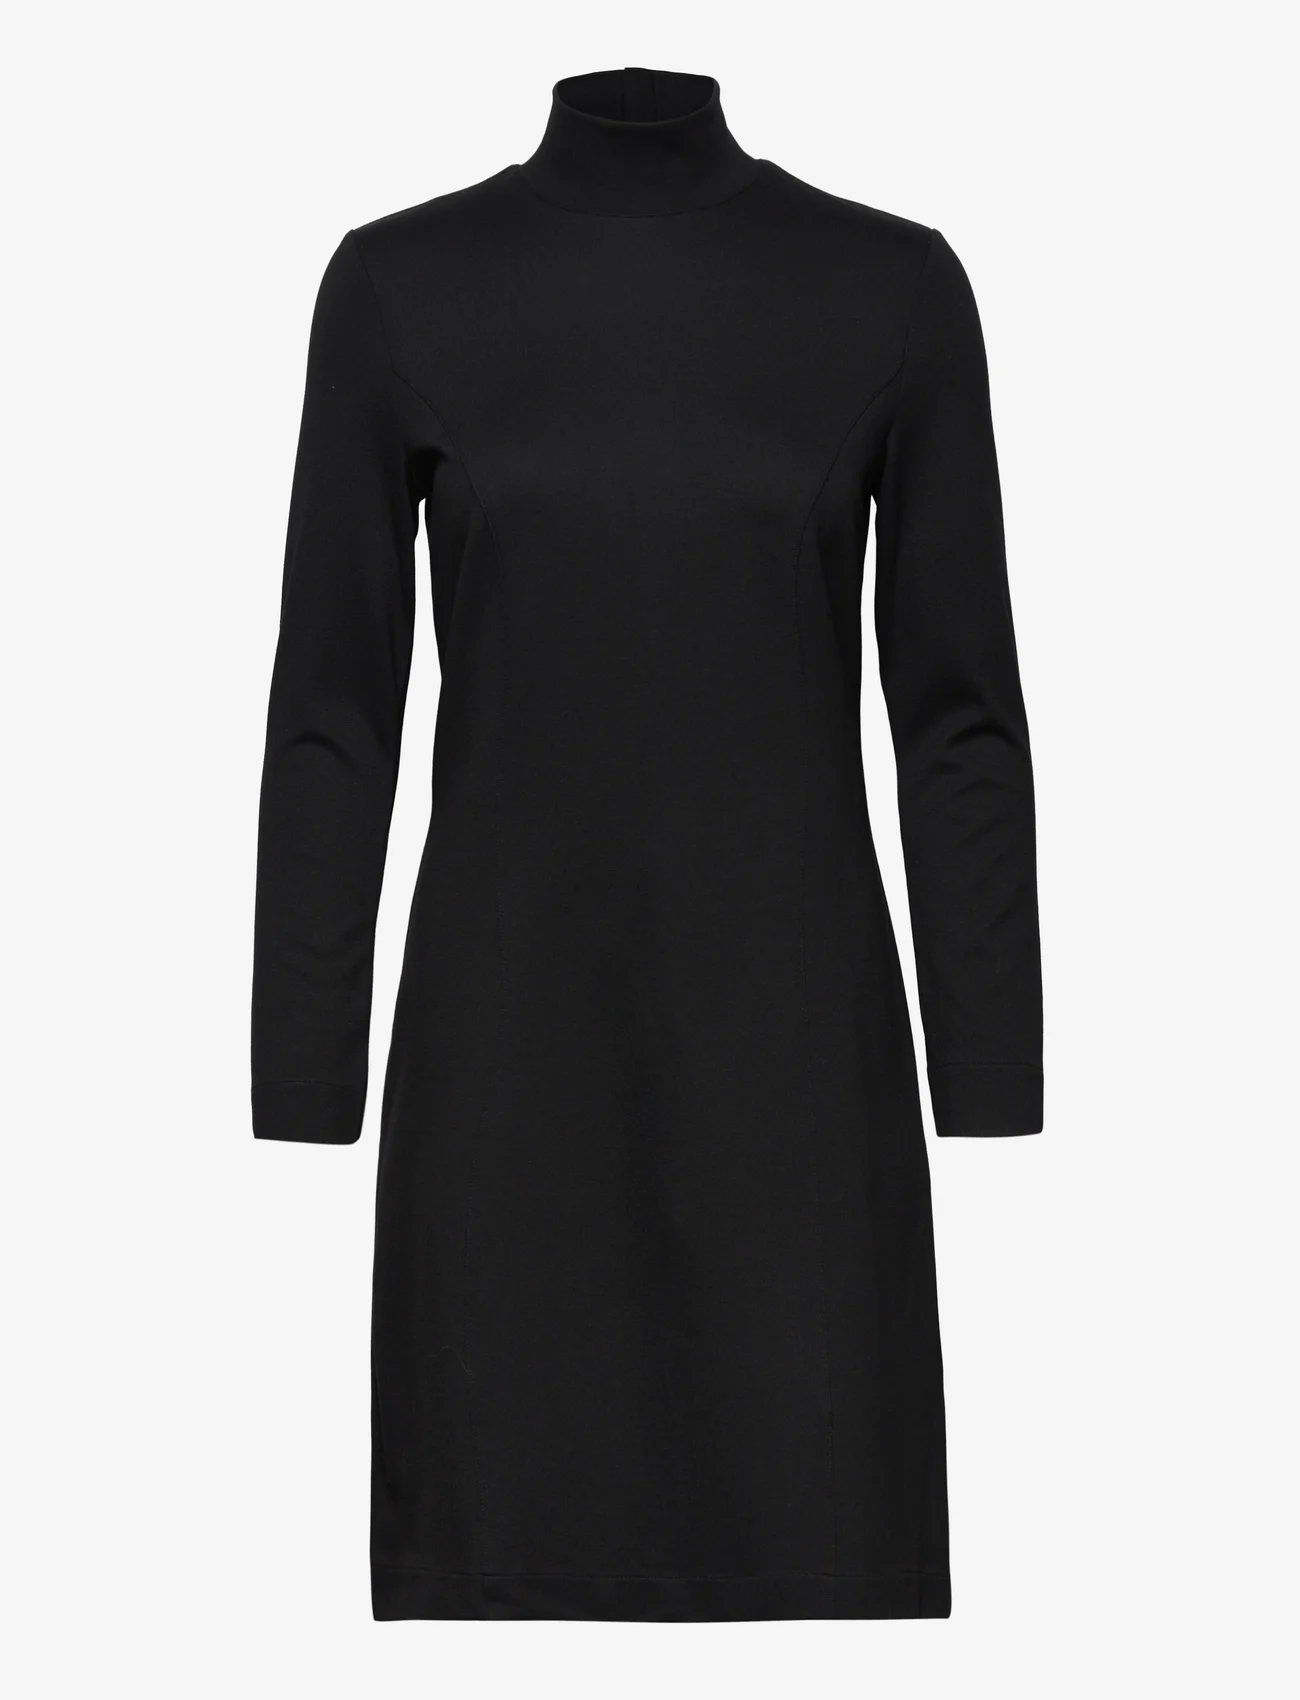 Esprit Casual - Punto jersey dress - knitted dresses - black - 0